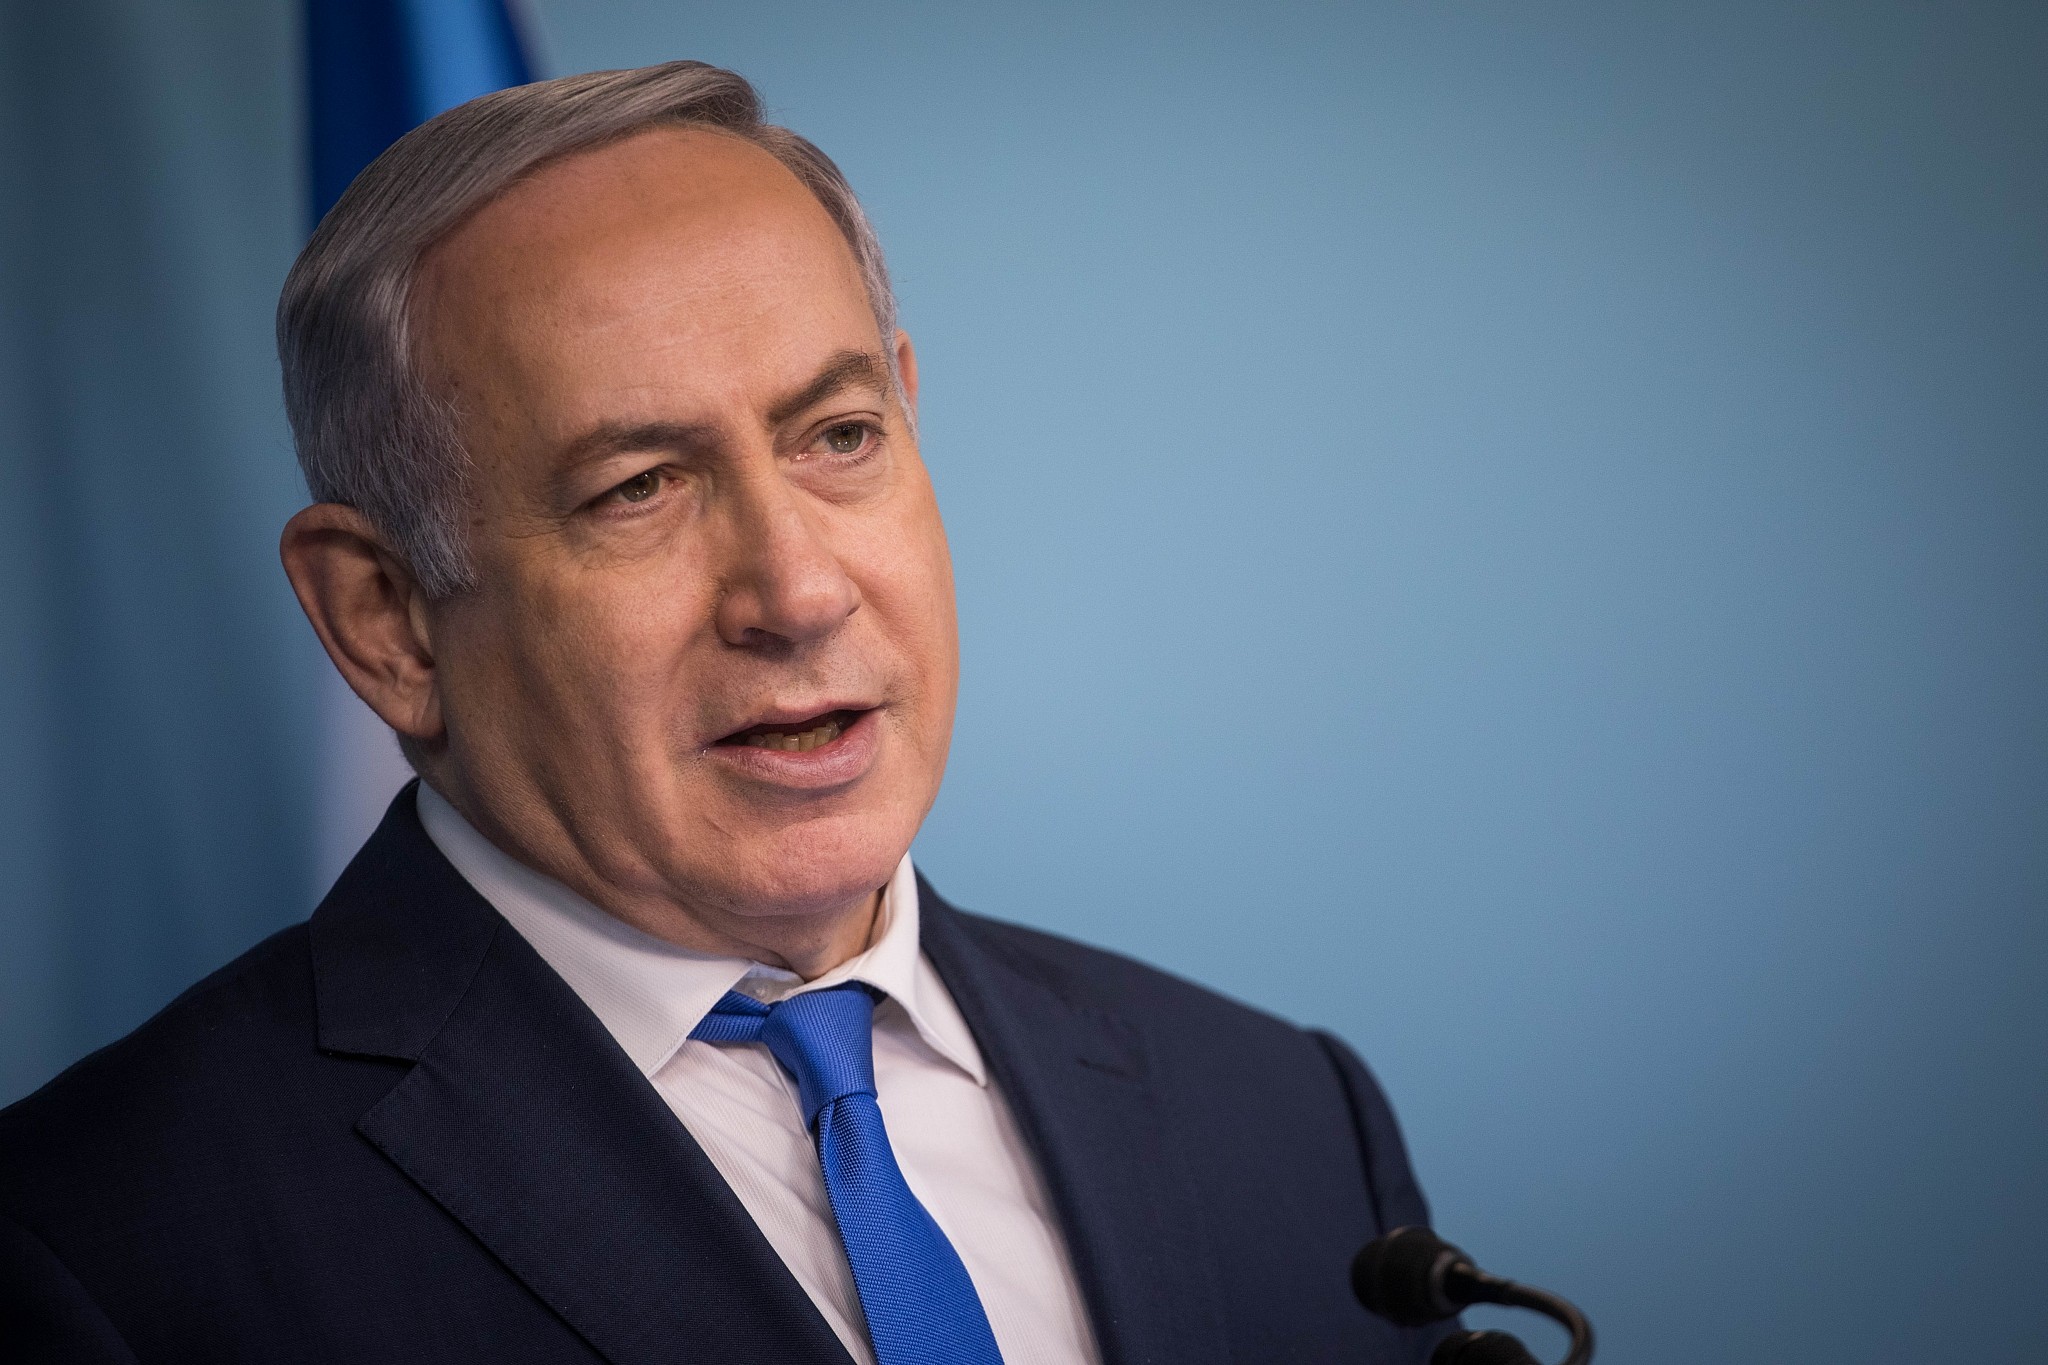 netanyahu-relations-with-jordan-back-on-track-new-envoy-to-be-named